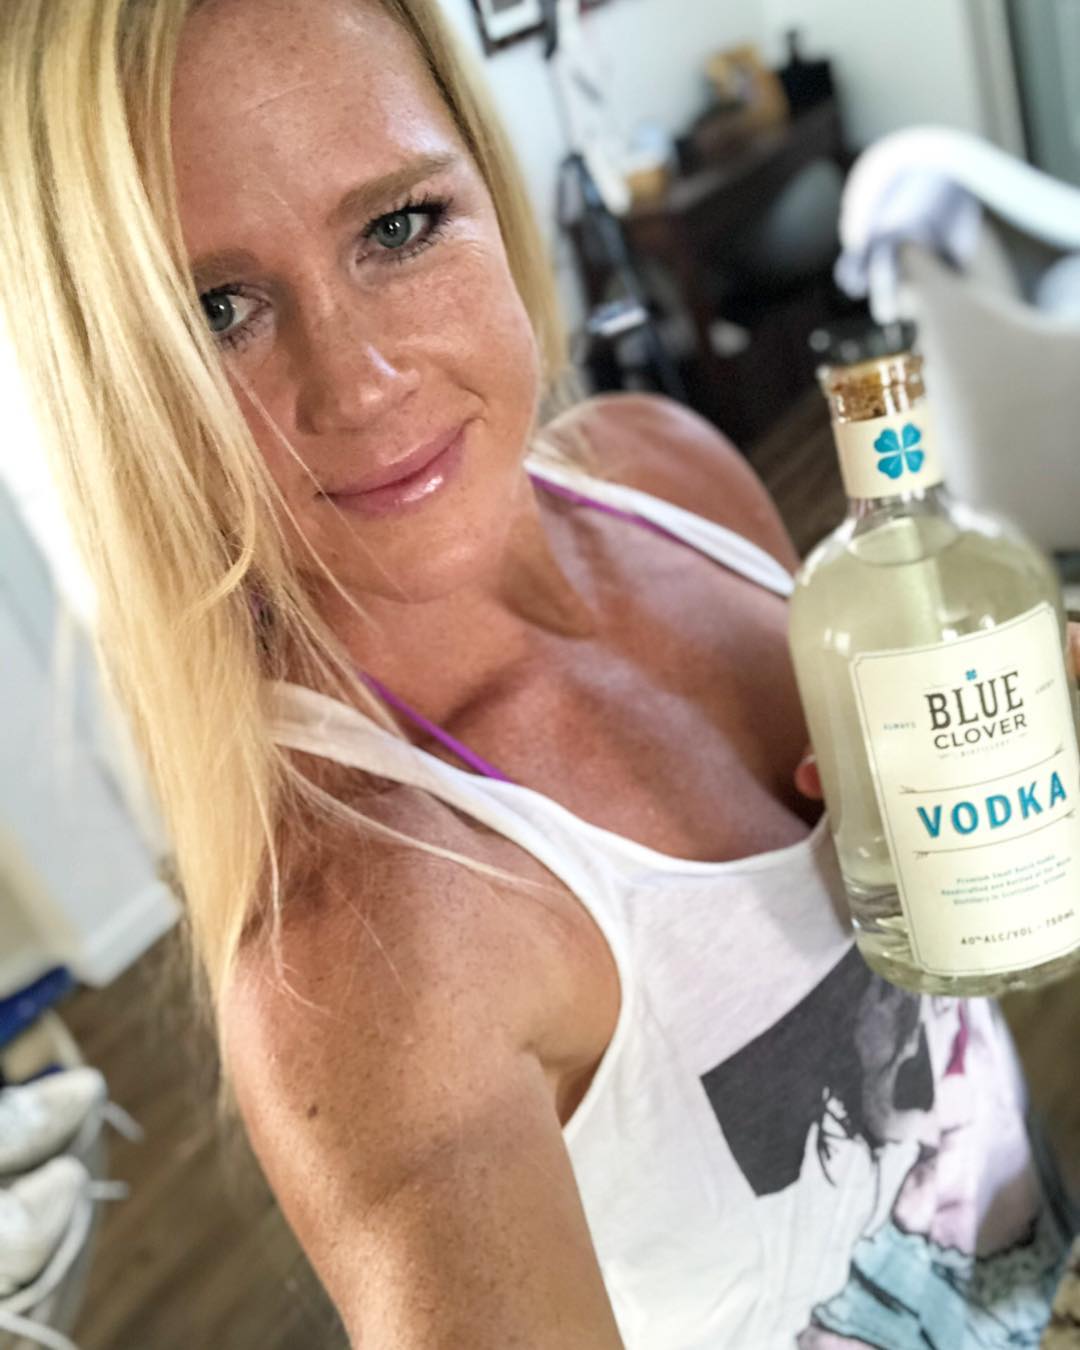 Holly Holm IG Post - Come say hi and try some @bluecloverdistillery vodka! I’ll be hanging out at Total Wine and More...